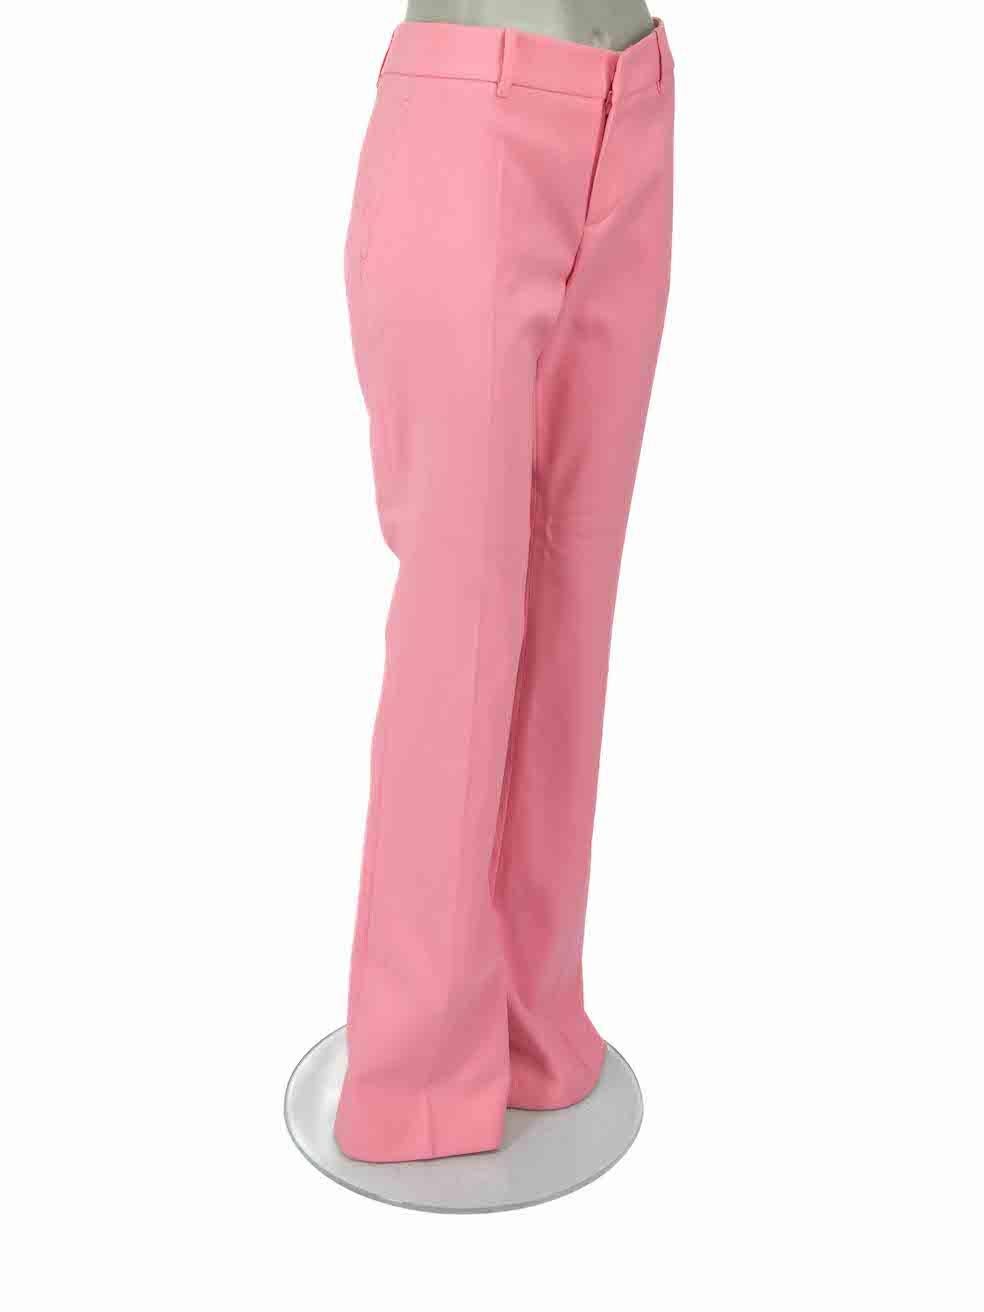 CONDITION is Never worn, with tags. Some colour discolouration to the inner right thigh due to poor storage of this new Gucci designer resale item.
 
 Details
 2017
 Pink
 Wool
 Flared leg trousers
 Low rise
 Front zip closure with clasp
 2x Front